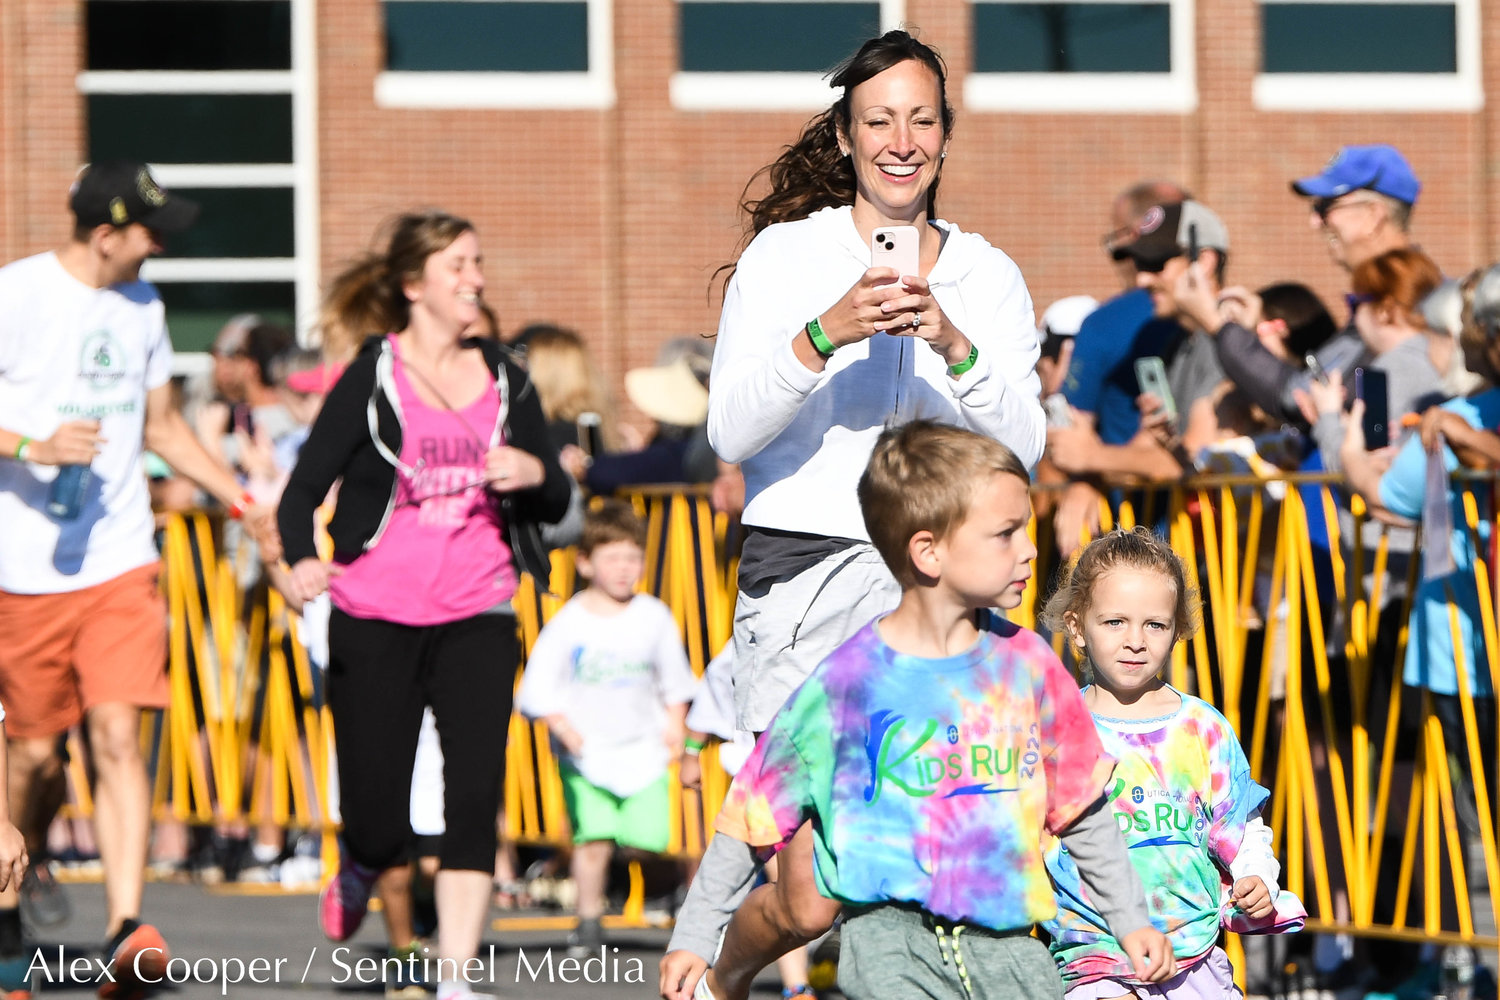 A woman records her children while participating in the Utica National Kids Run at Mohawk Valley Community College in Utica on Saturday.